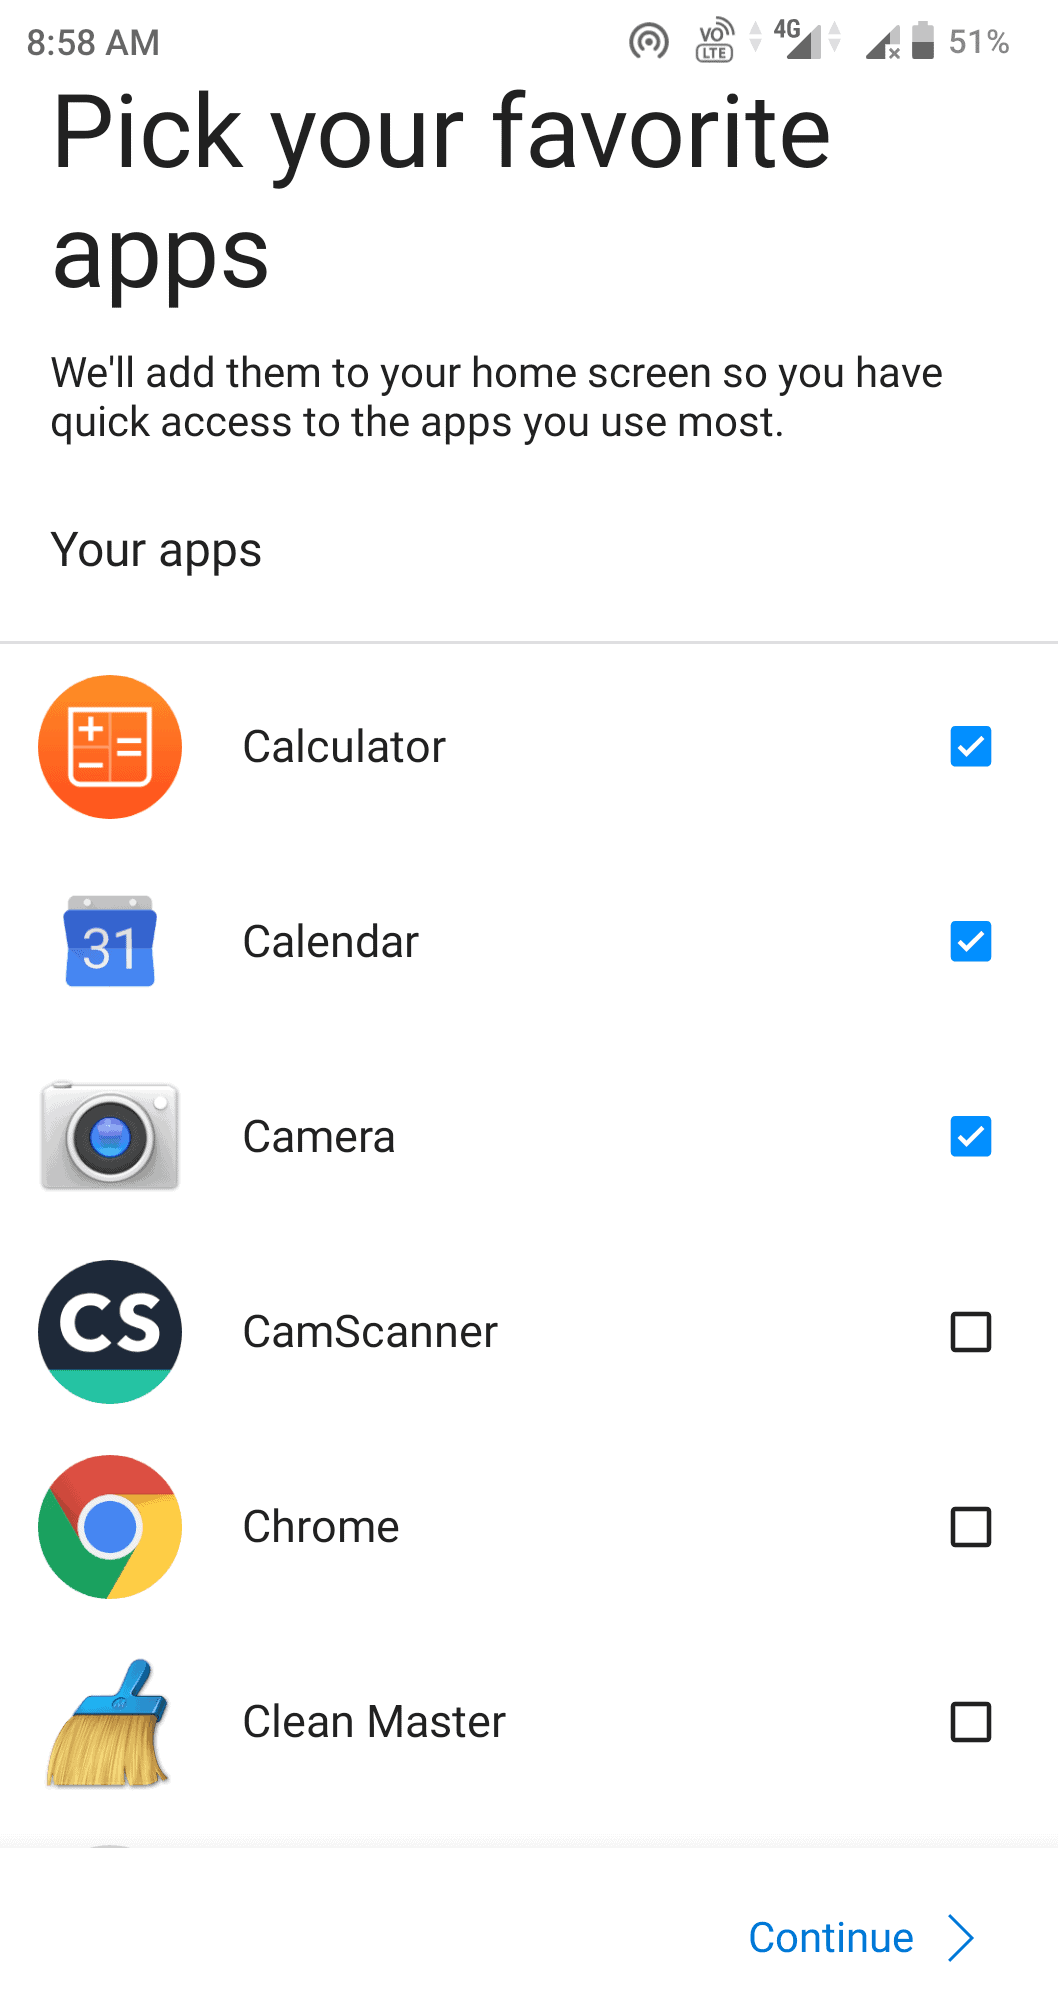 Quick access to your selected apps

